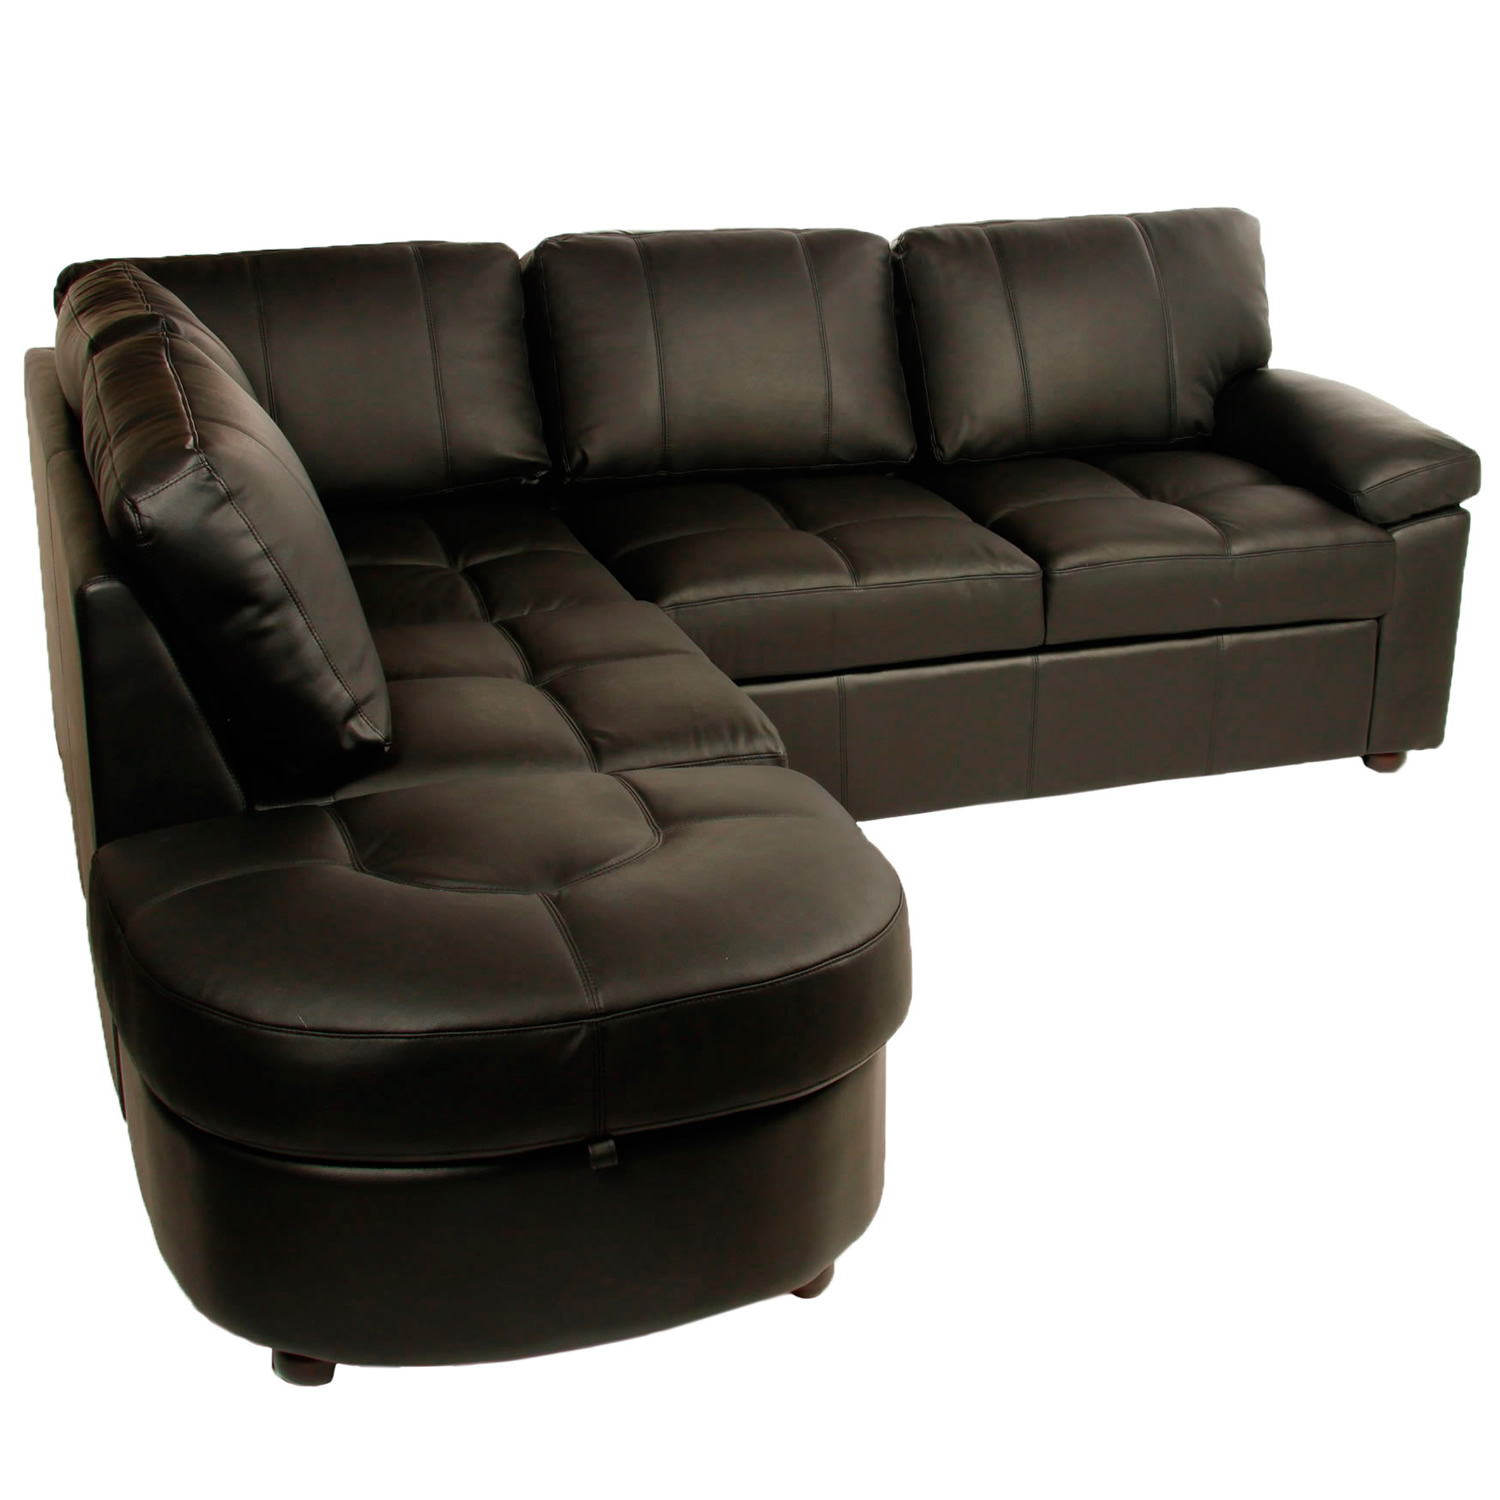 Master Image of: sofa bed sectional leons corner leather sofa bed with storage